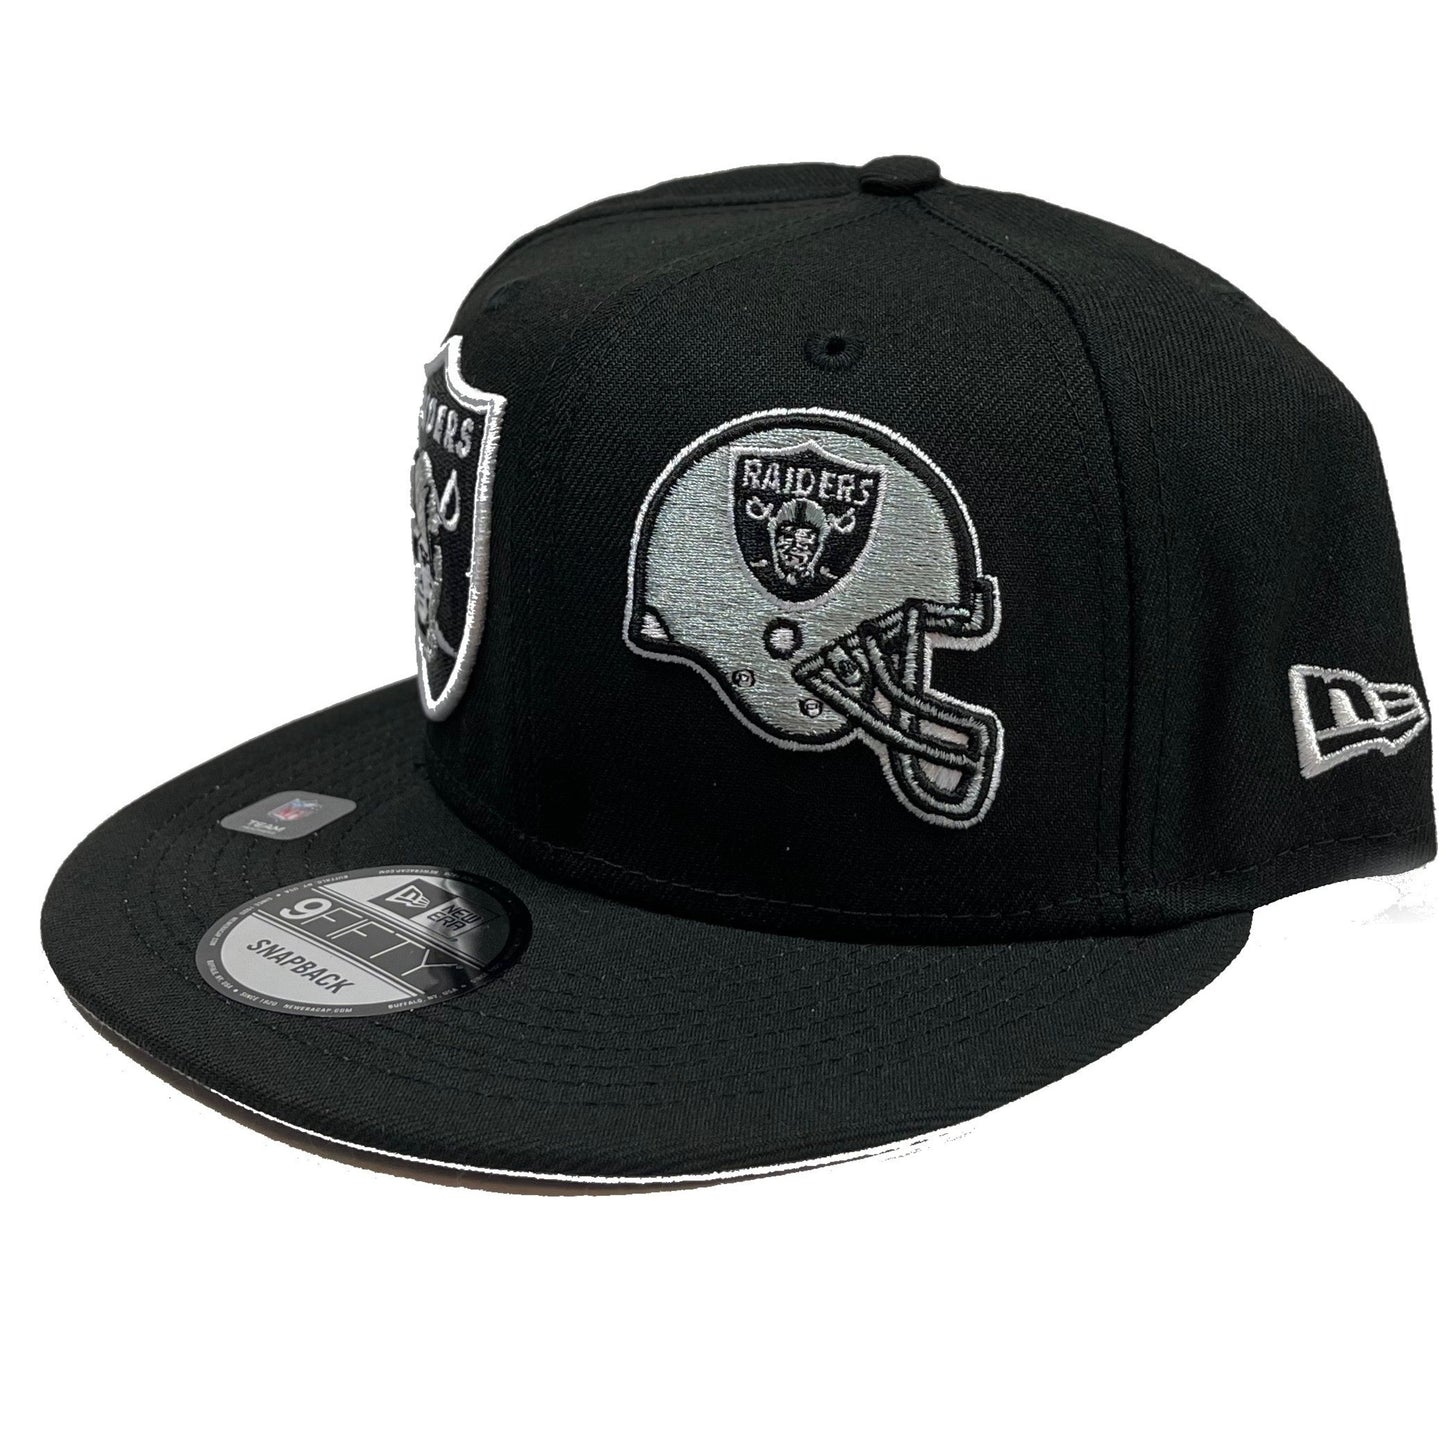 Raiders Double Logo Patched (Black) Snapback